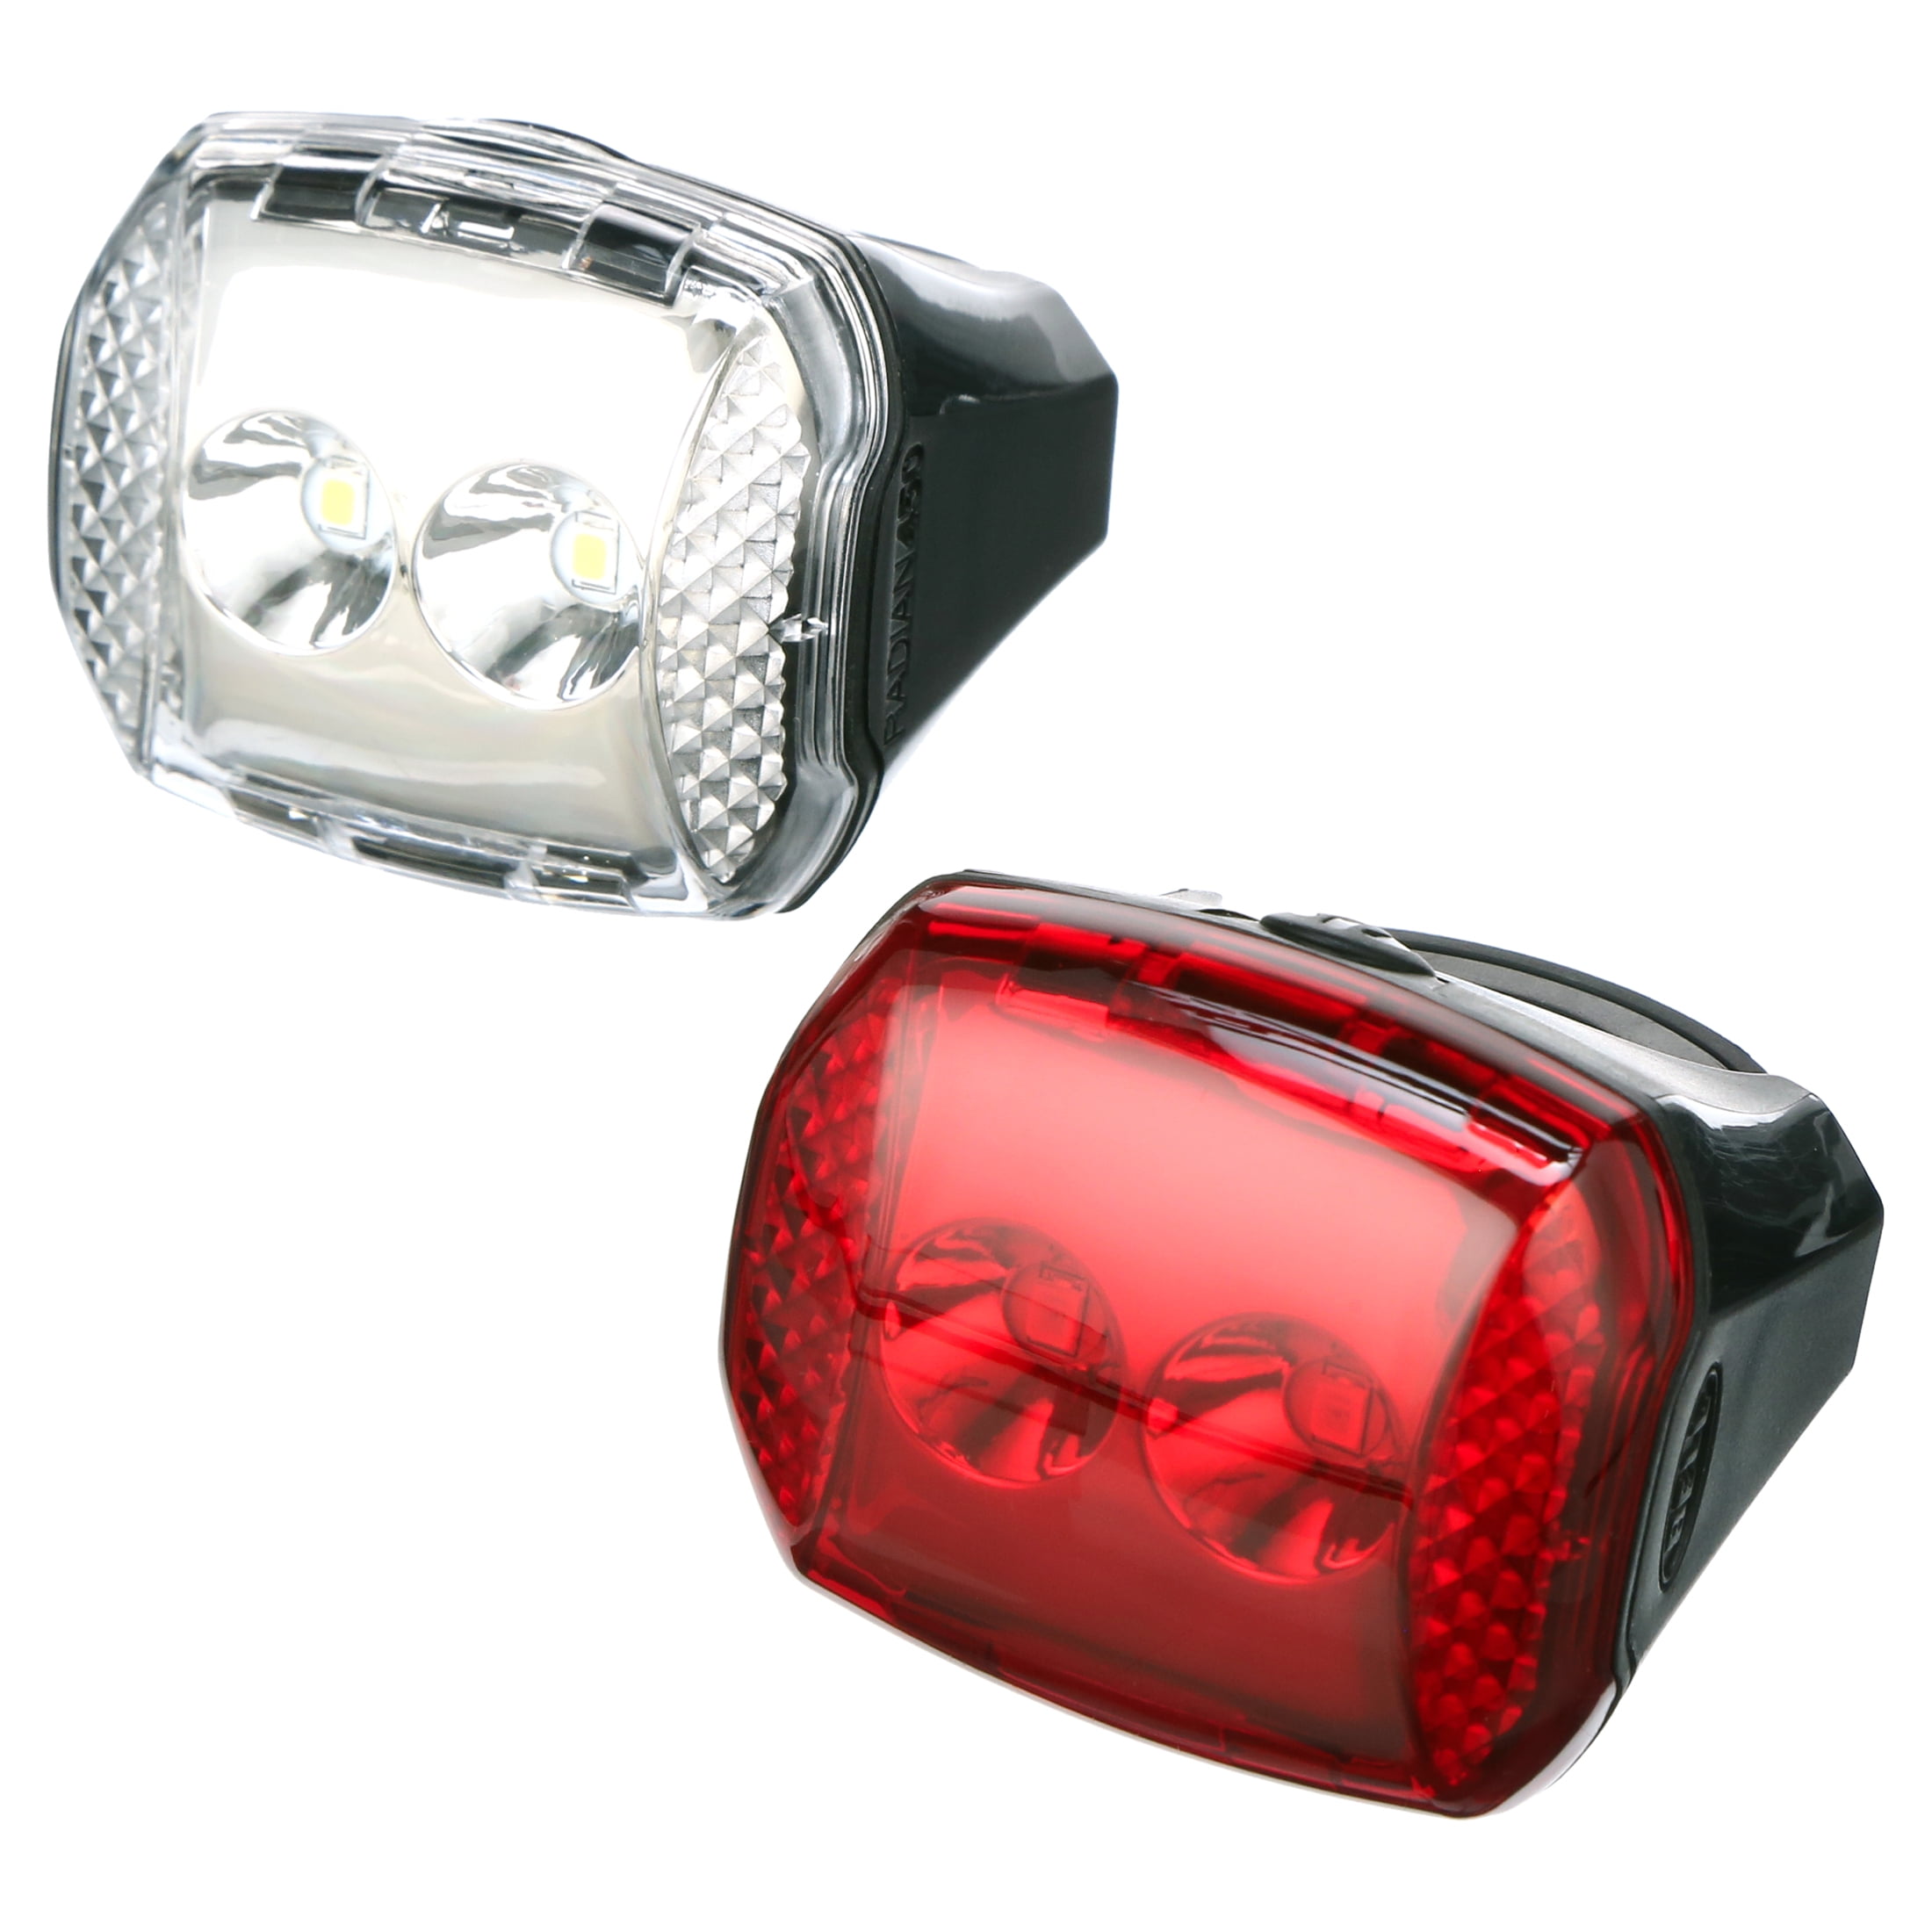 Buy AOW Harley Type Bike Led Fog Lamp Light Assembly White & Blue (Set of  2) with Switch for Bullet Electra 350 Online At Price ₹1405